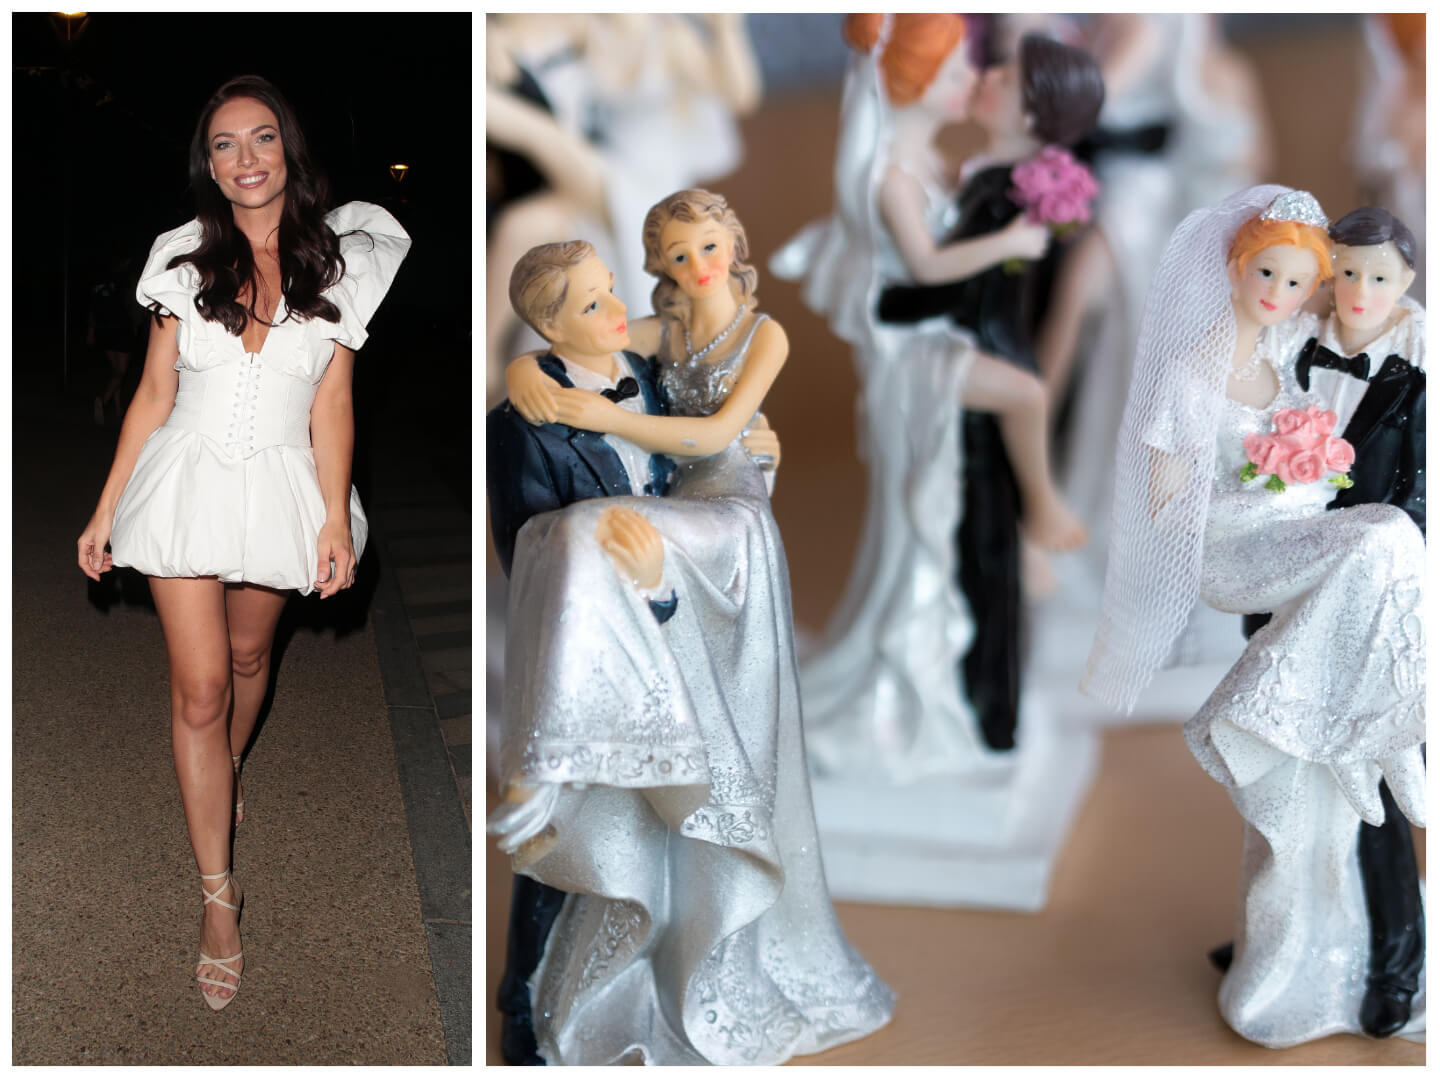 Side by side images of April Banbury from 'Married at First Sight: UK' and bride and groom wedding cake figures